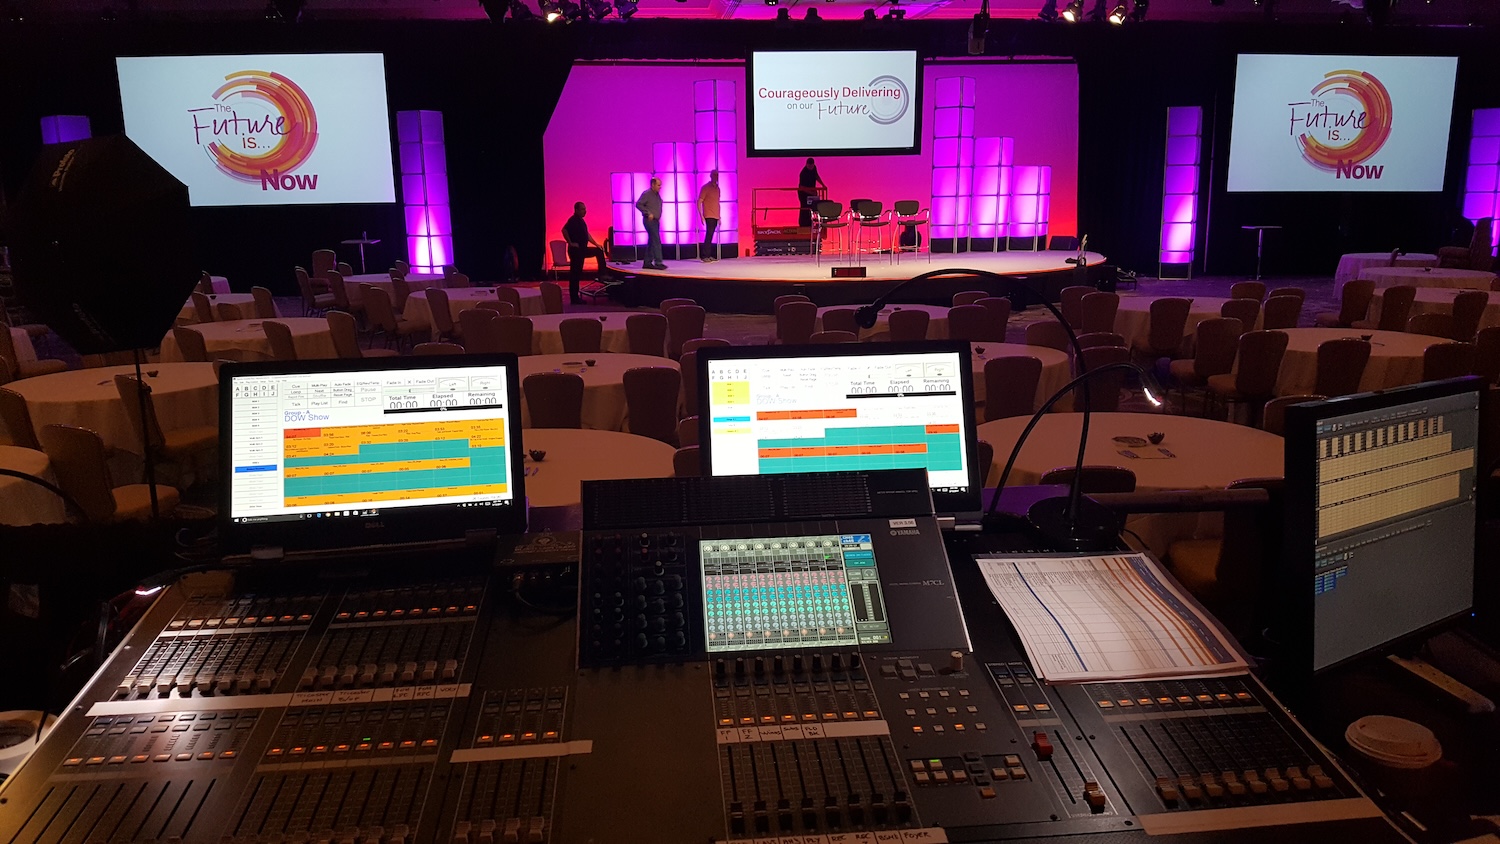 A view from the audio-visual control area of a conference room set up with round tables, a stage, and screens displaying the message 'The Future is... NOW'.